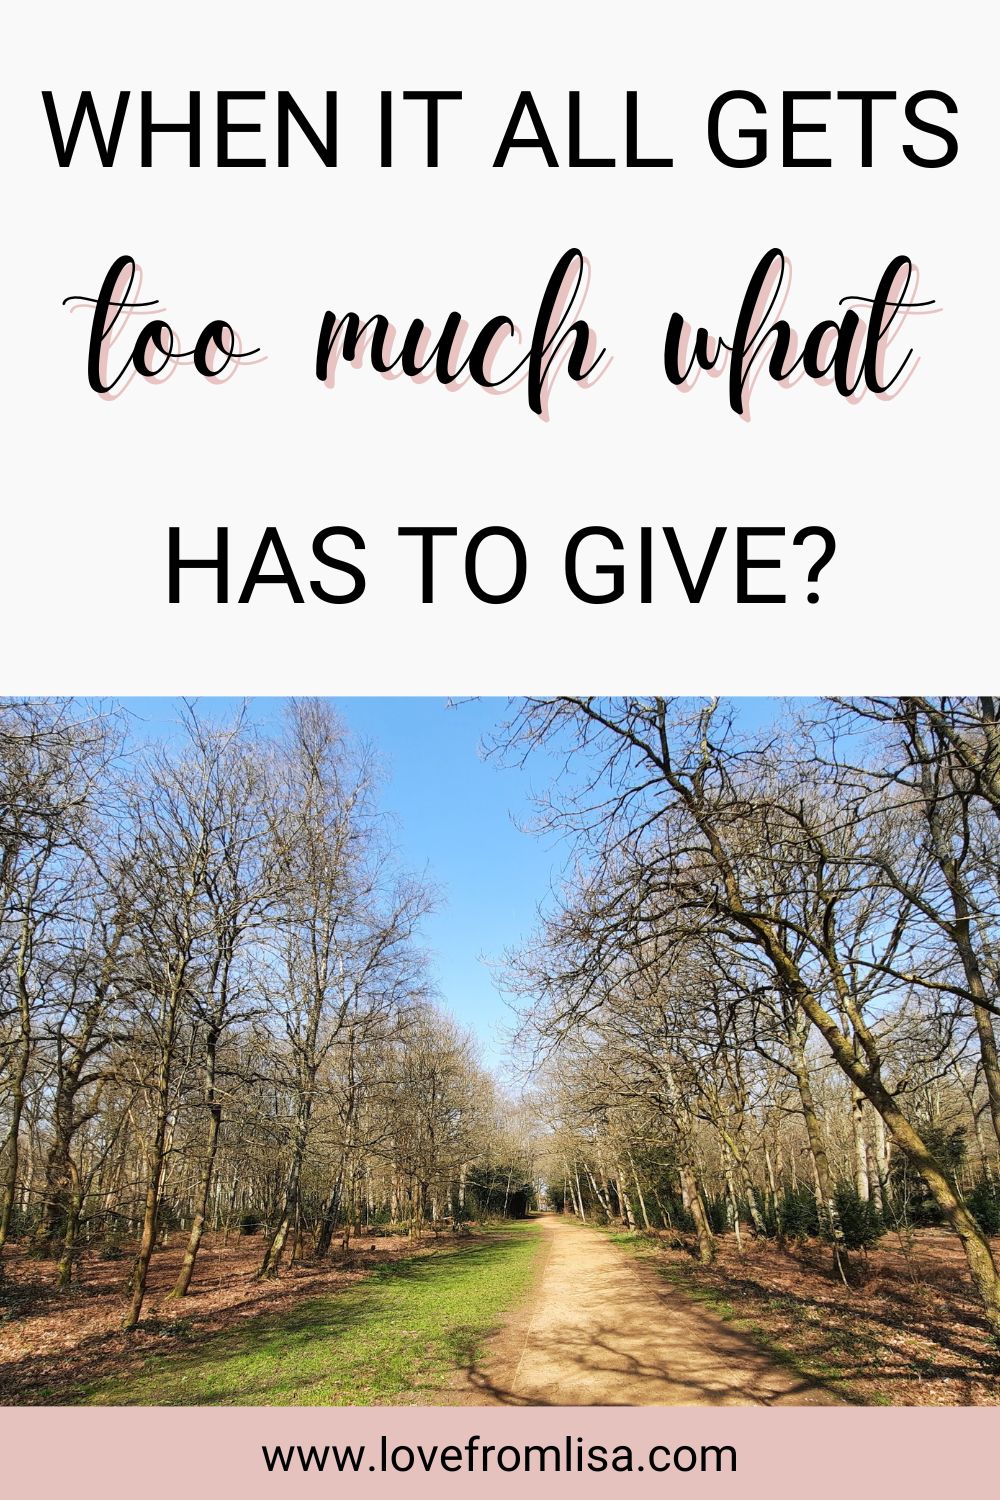 When it all gets too much, what has to give?